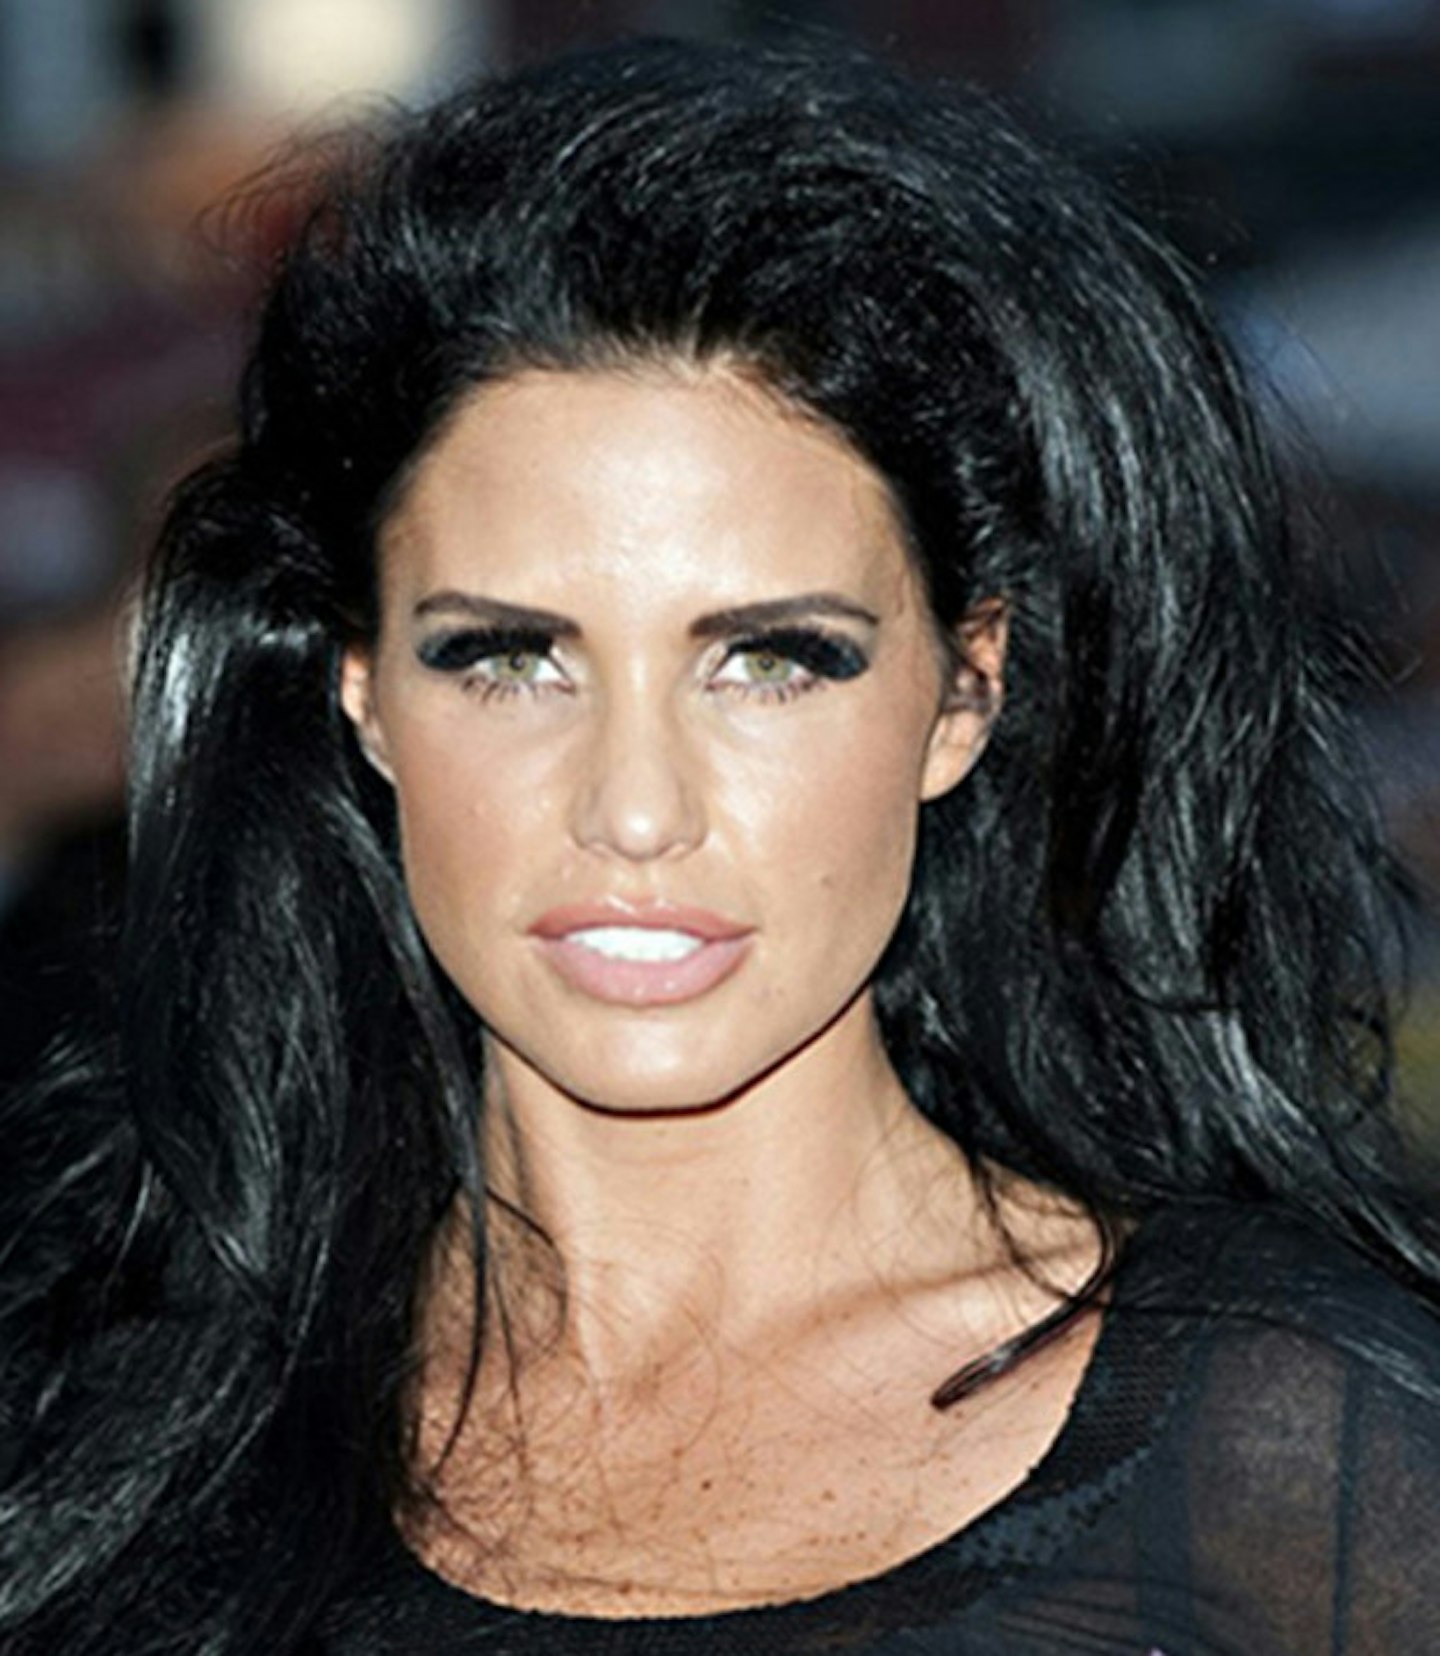 Katie Price: 9th August 2010